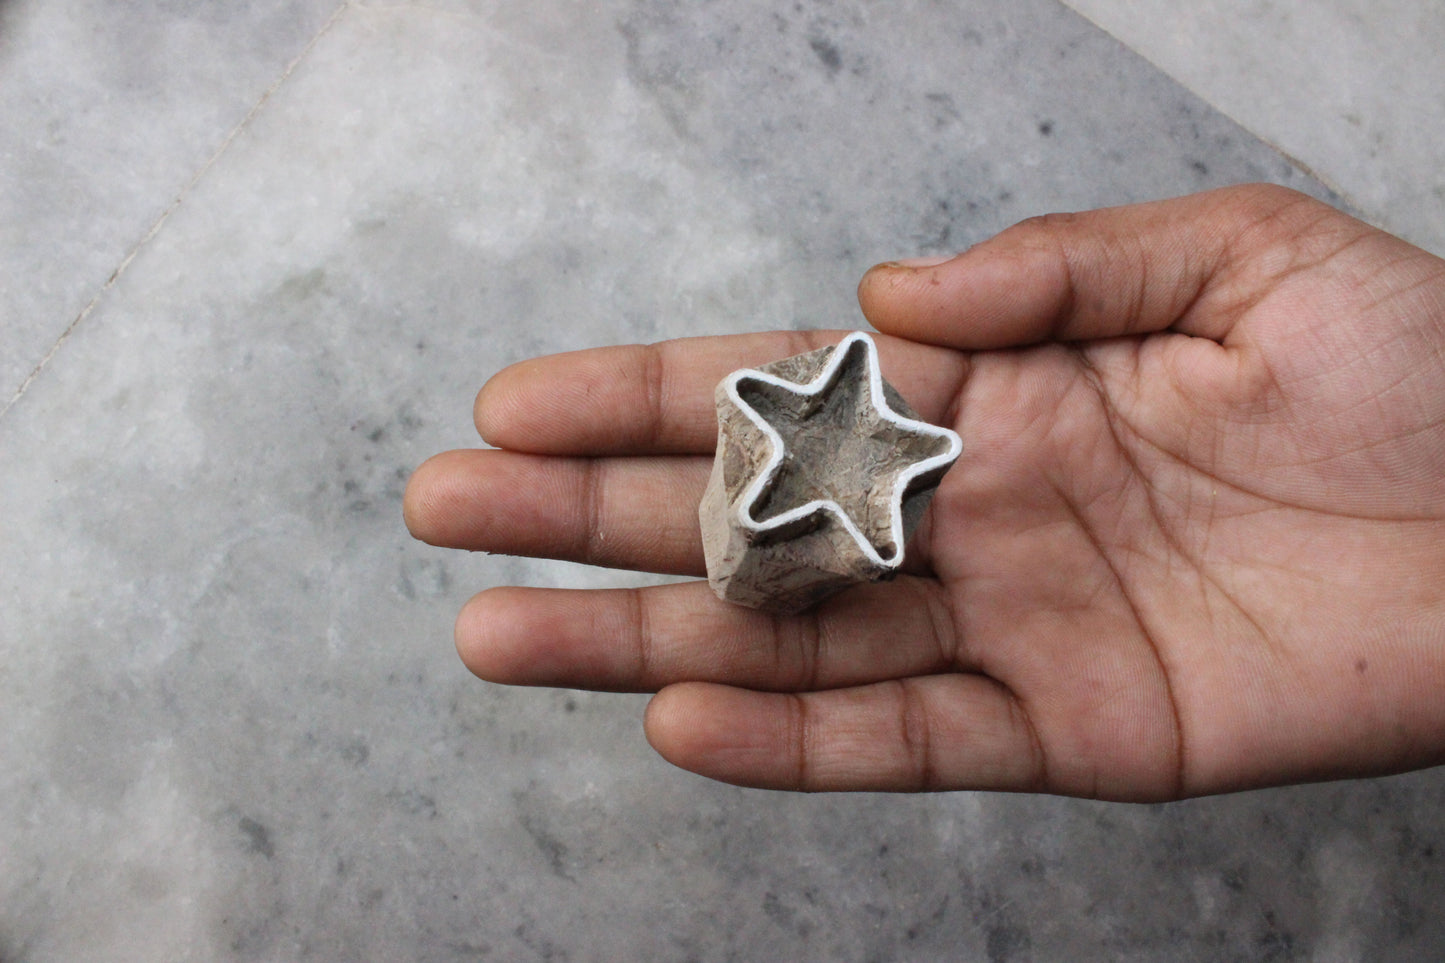 Star Fabric Stamp Carve Block Stamp Shape Block Print Stamp Hand Carved Wooden Stamp For Printing Indian Soap Making Stamp Traditional Wooden Block